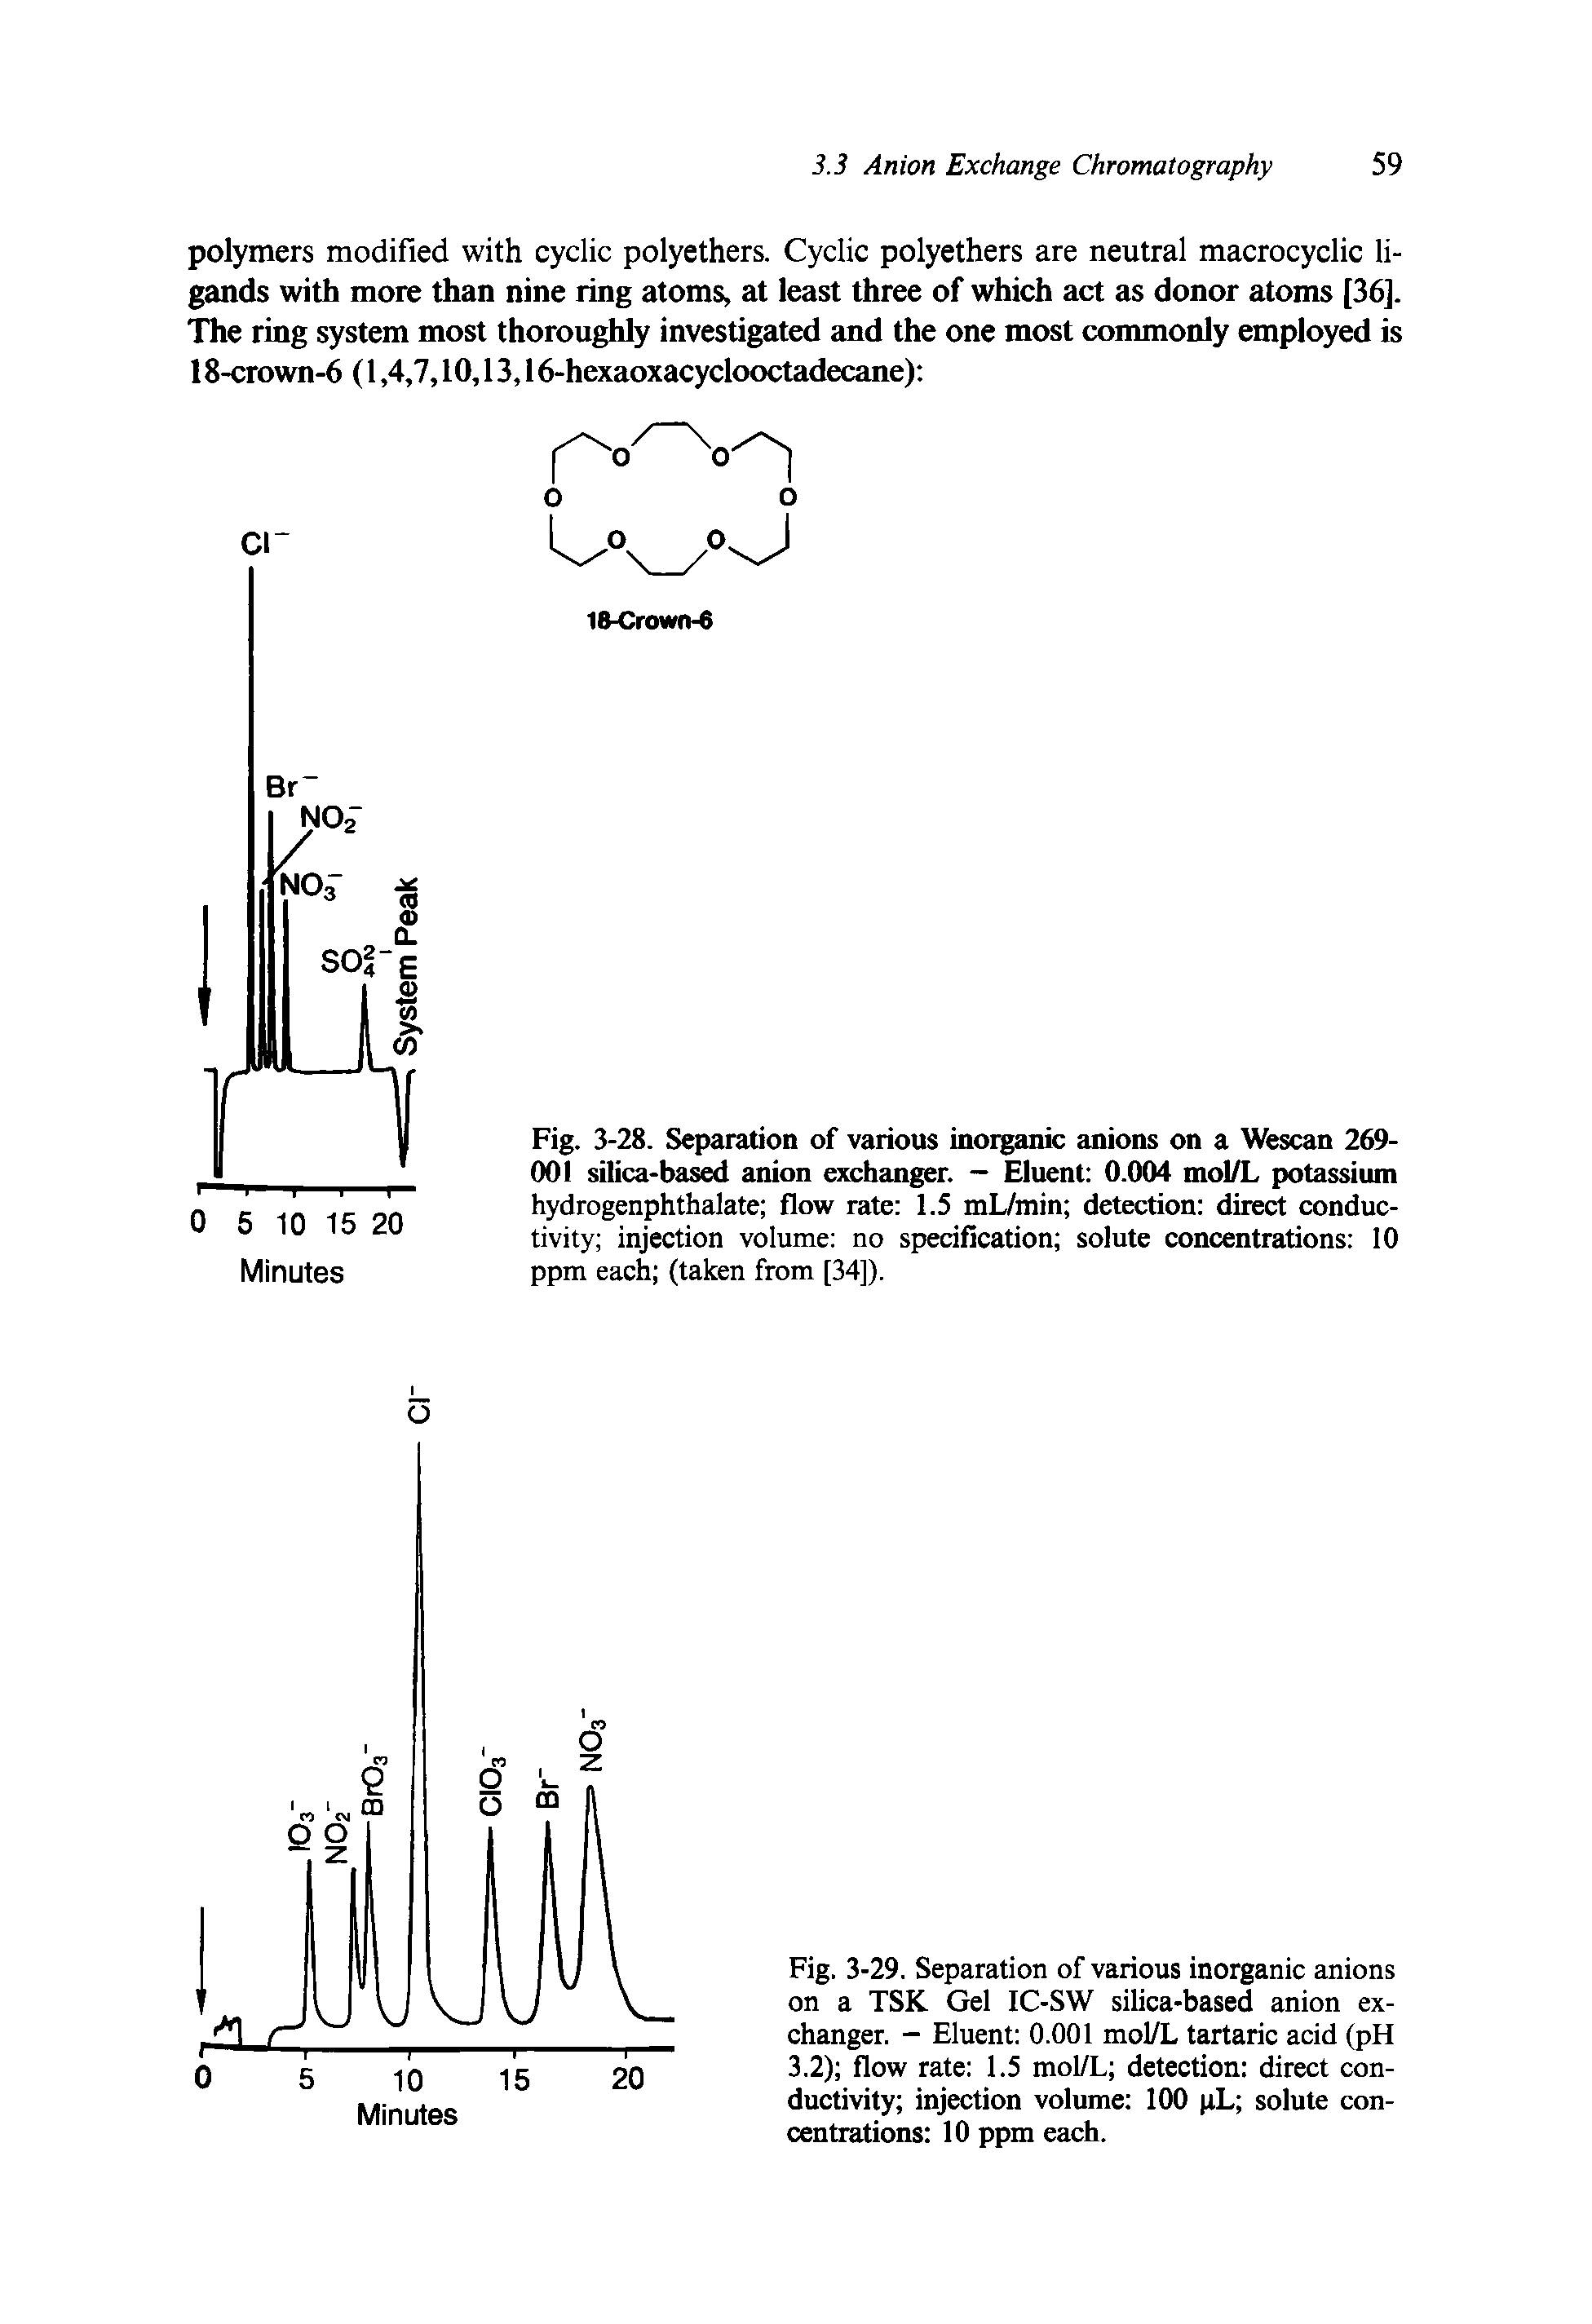 Fig. 3-28. Separation of various inorganic anions on a Wescan 269-001 silica-based anion exchanger. — Eluent 0.004 mol/L potassium hydrogenphthalate flow rate 1.5 mL/min detection direct conductivity injection volume no specification solute concentrations 10 ppm each (taken from [34]).